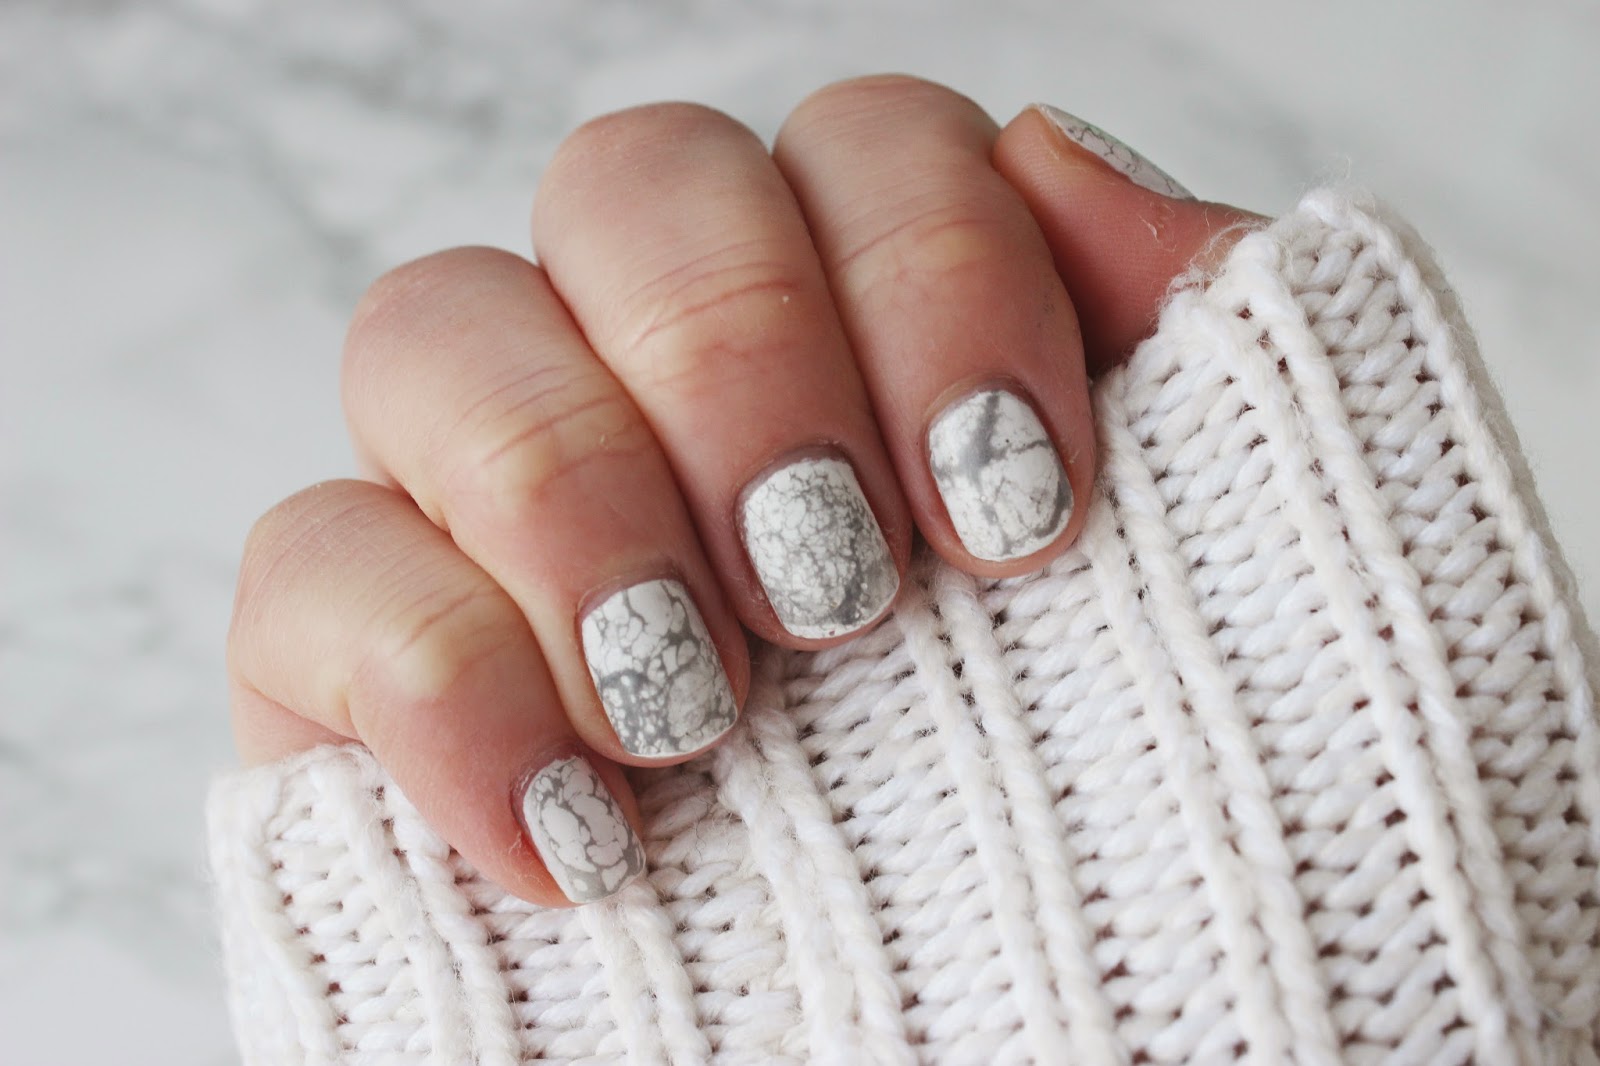 Marble Nail Art Designs Step by Step Tutorials - wide 7